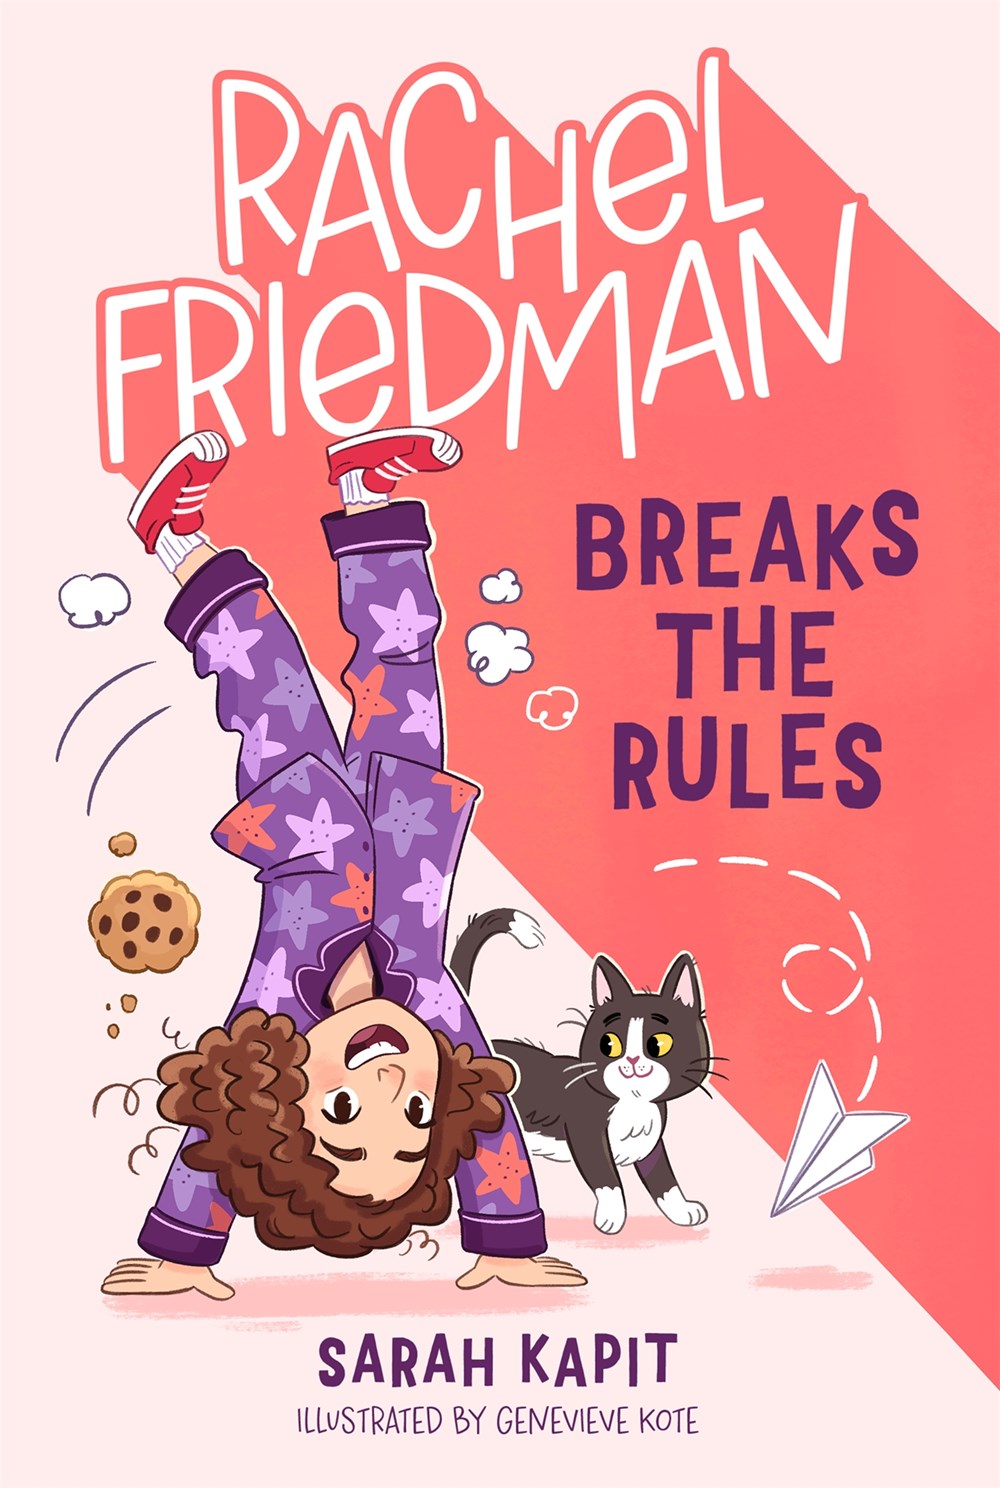 Cover of Rachel Friedman Breaks the Rules by Sarah Kapit, illustrated by Genevieve Kote